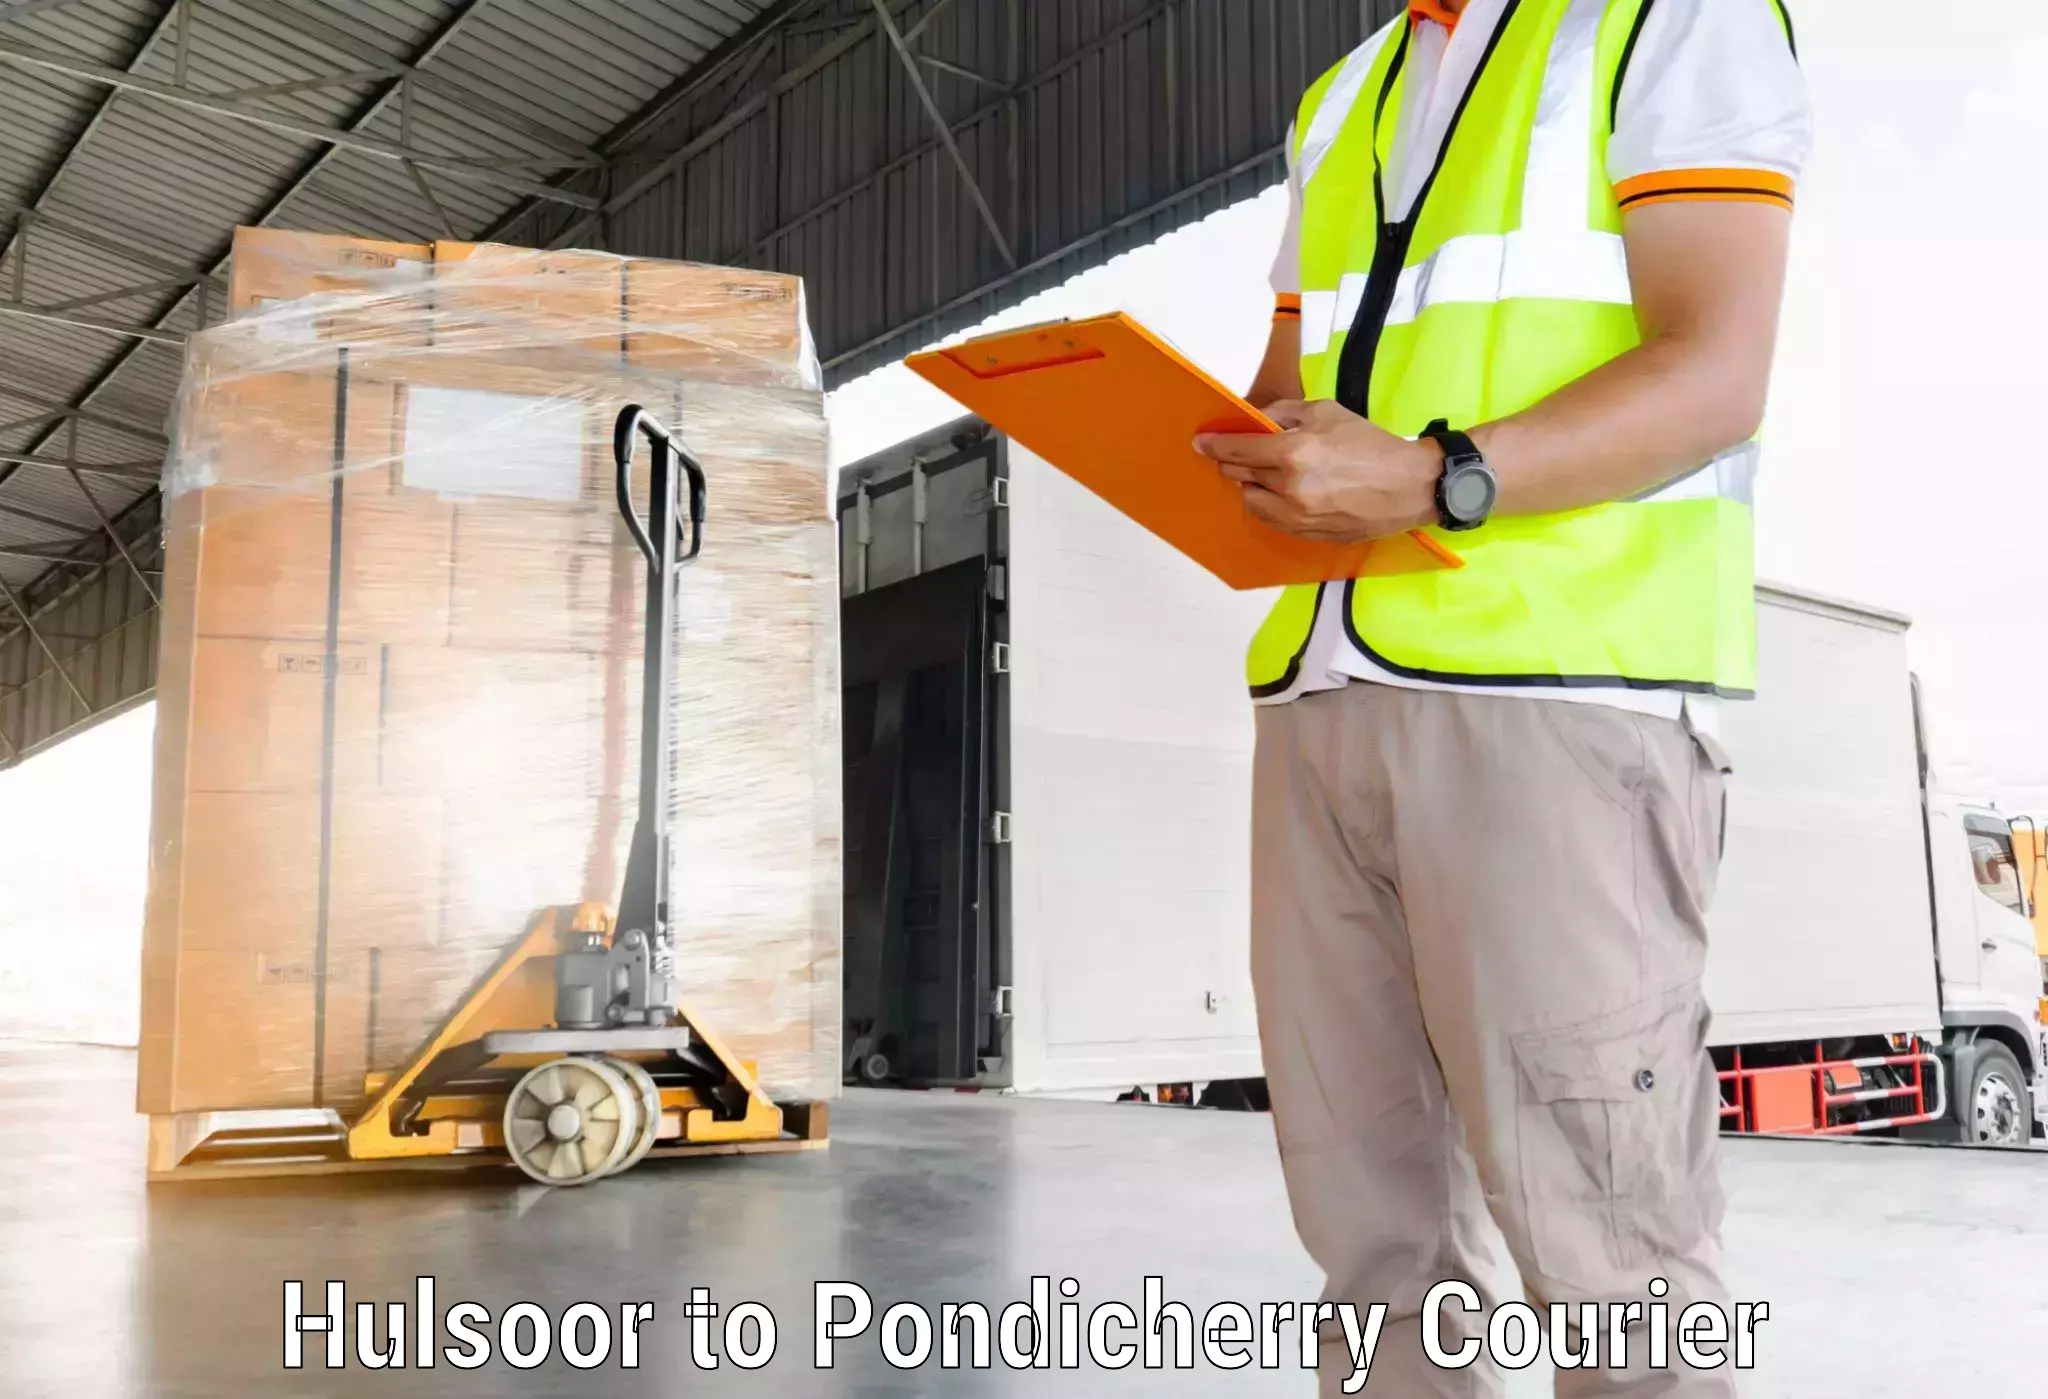 Same-day delivery options Hulsoor to Pondicherry University